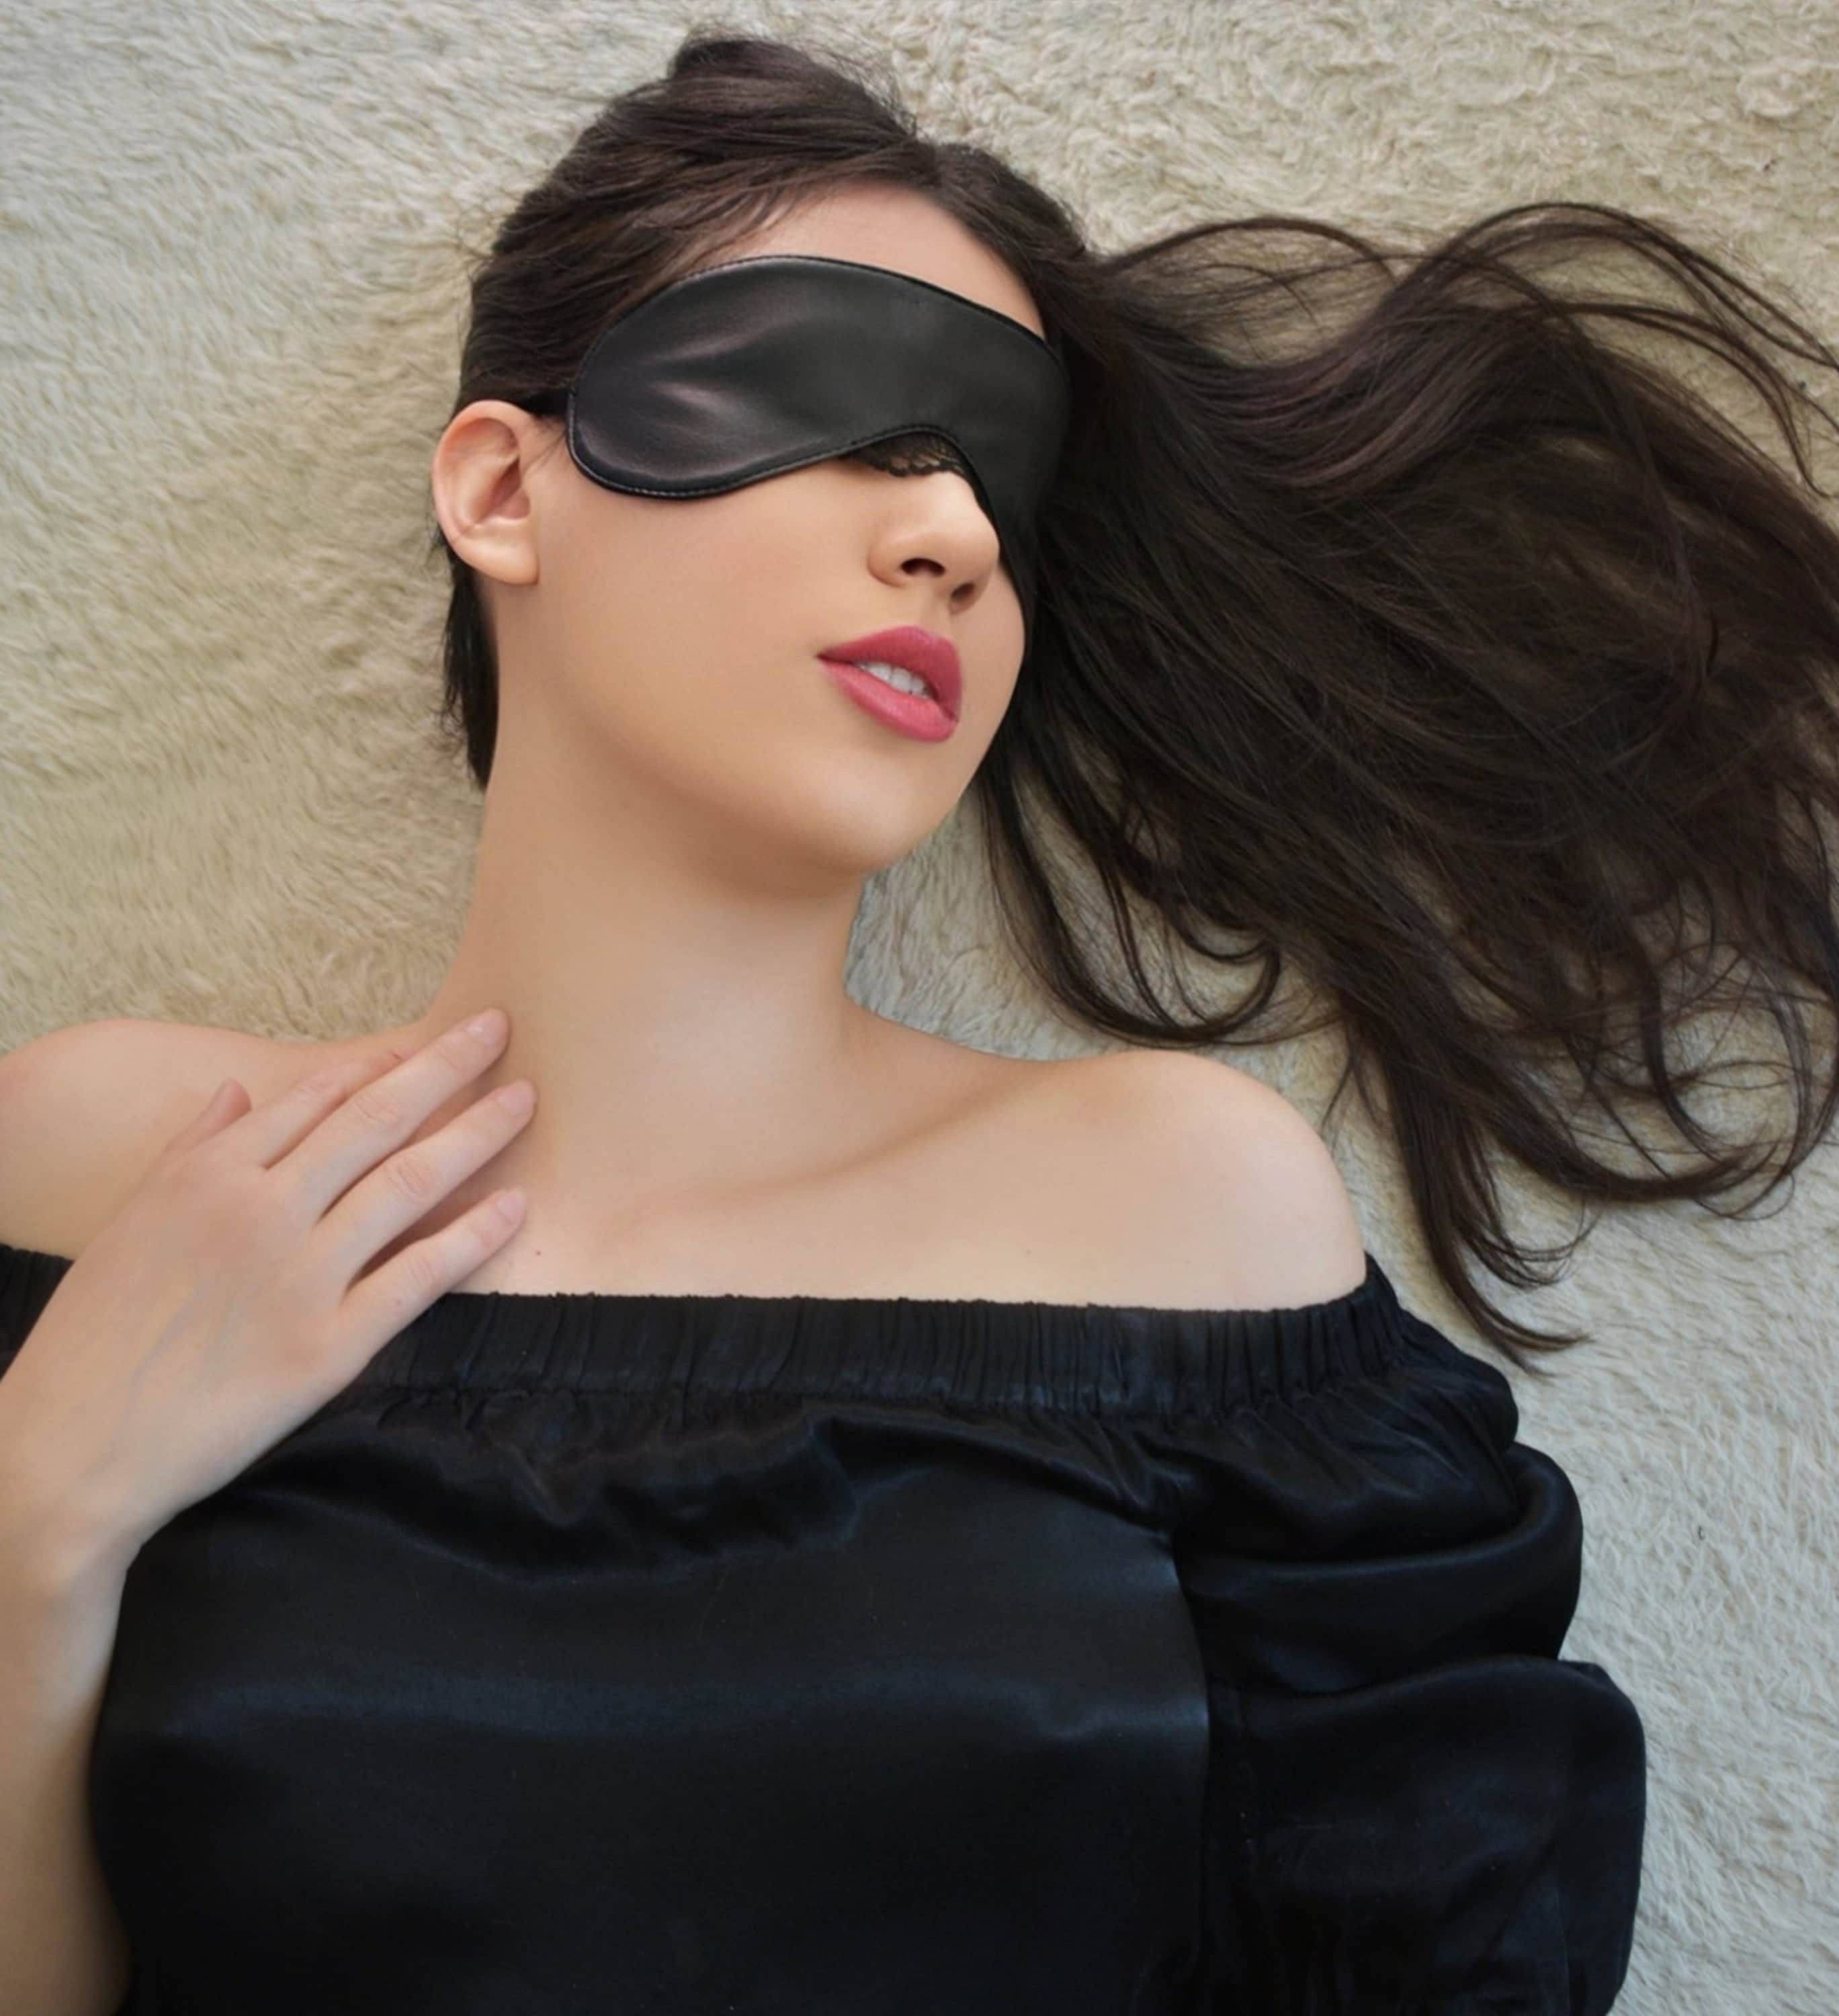 Rouge Leather Open Eye Blindfold Mask Choice of Colour